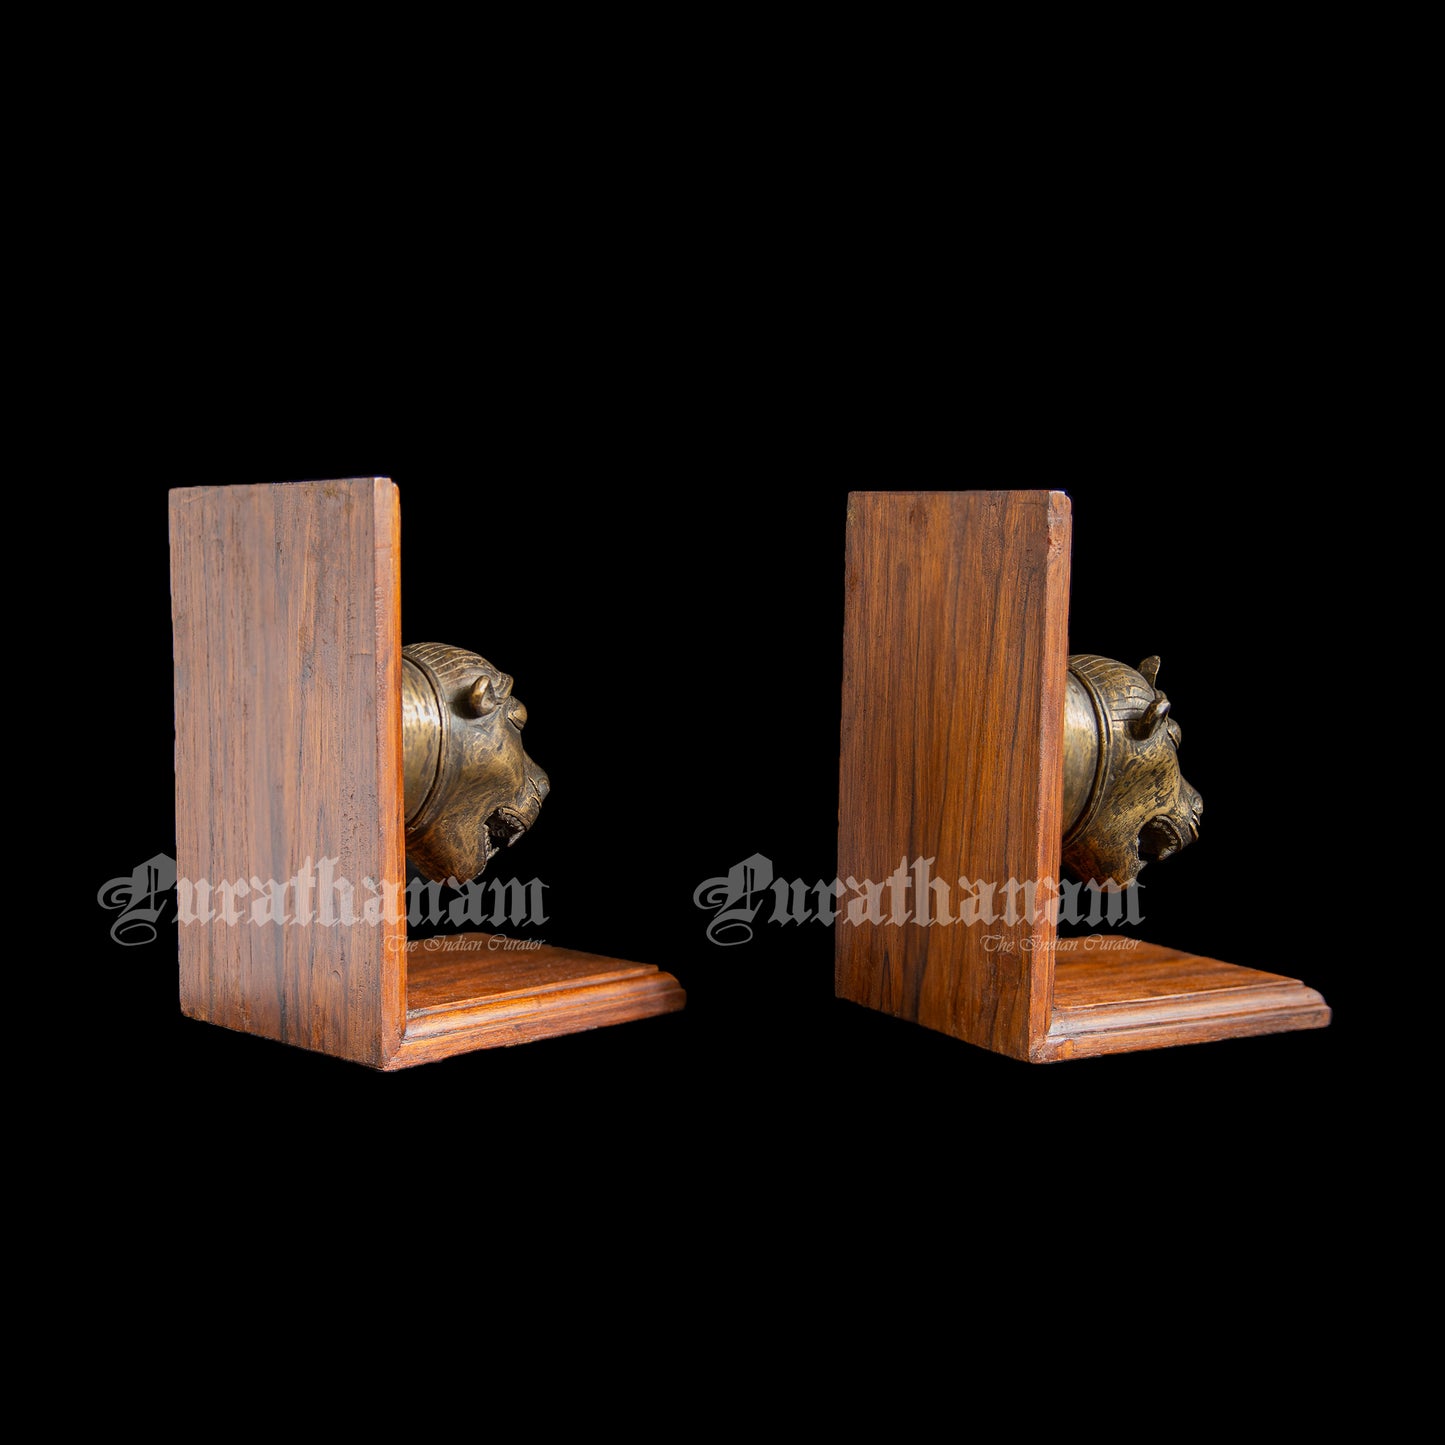 Palanquin Holder Bookends